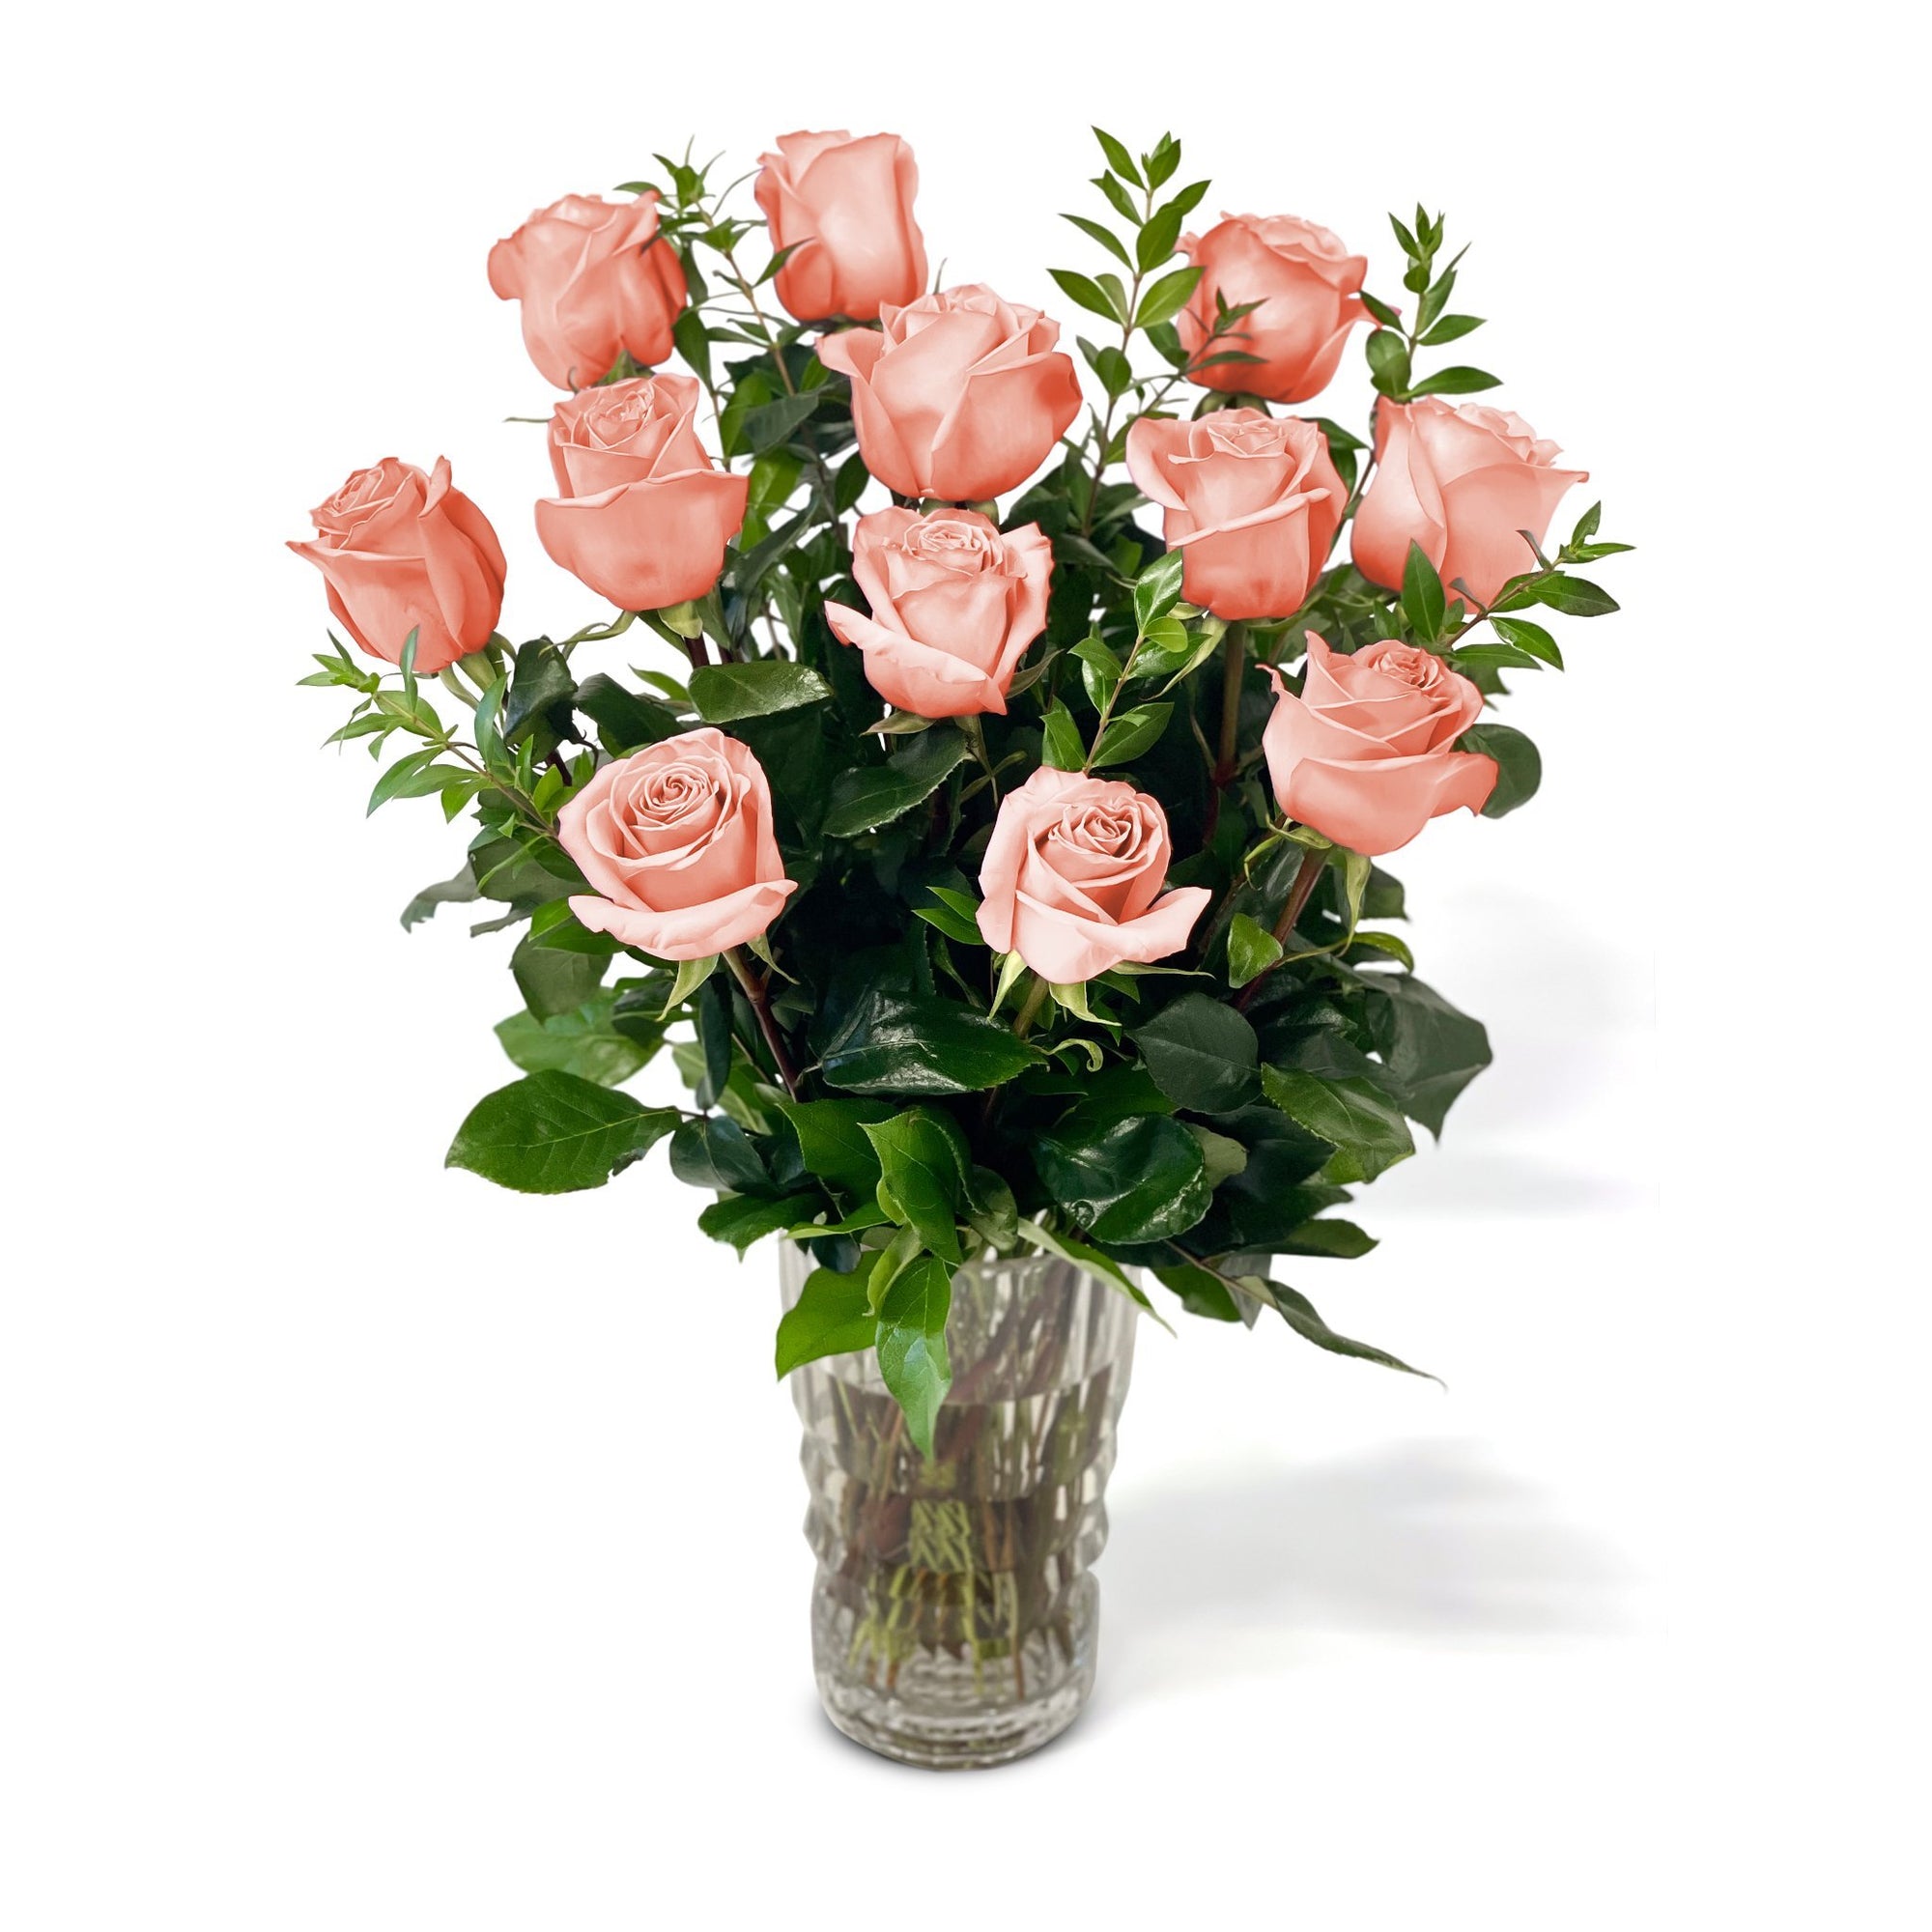 NYC Flower Delivery - Fresh Roses in a Crystal Vase | Dozen Peach - Roses